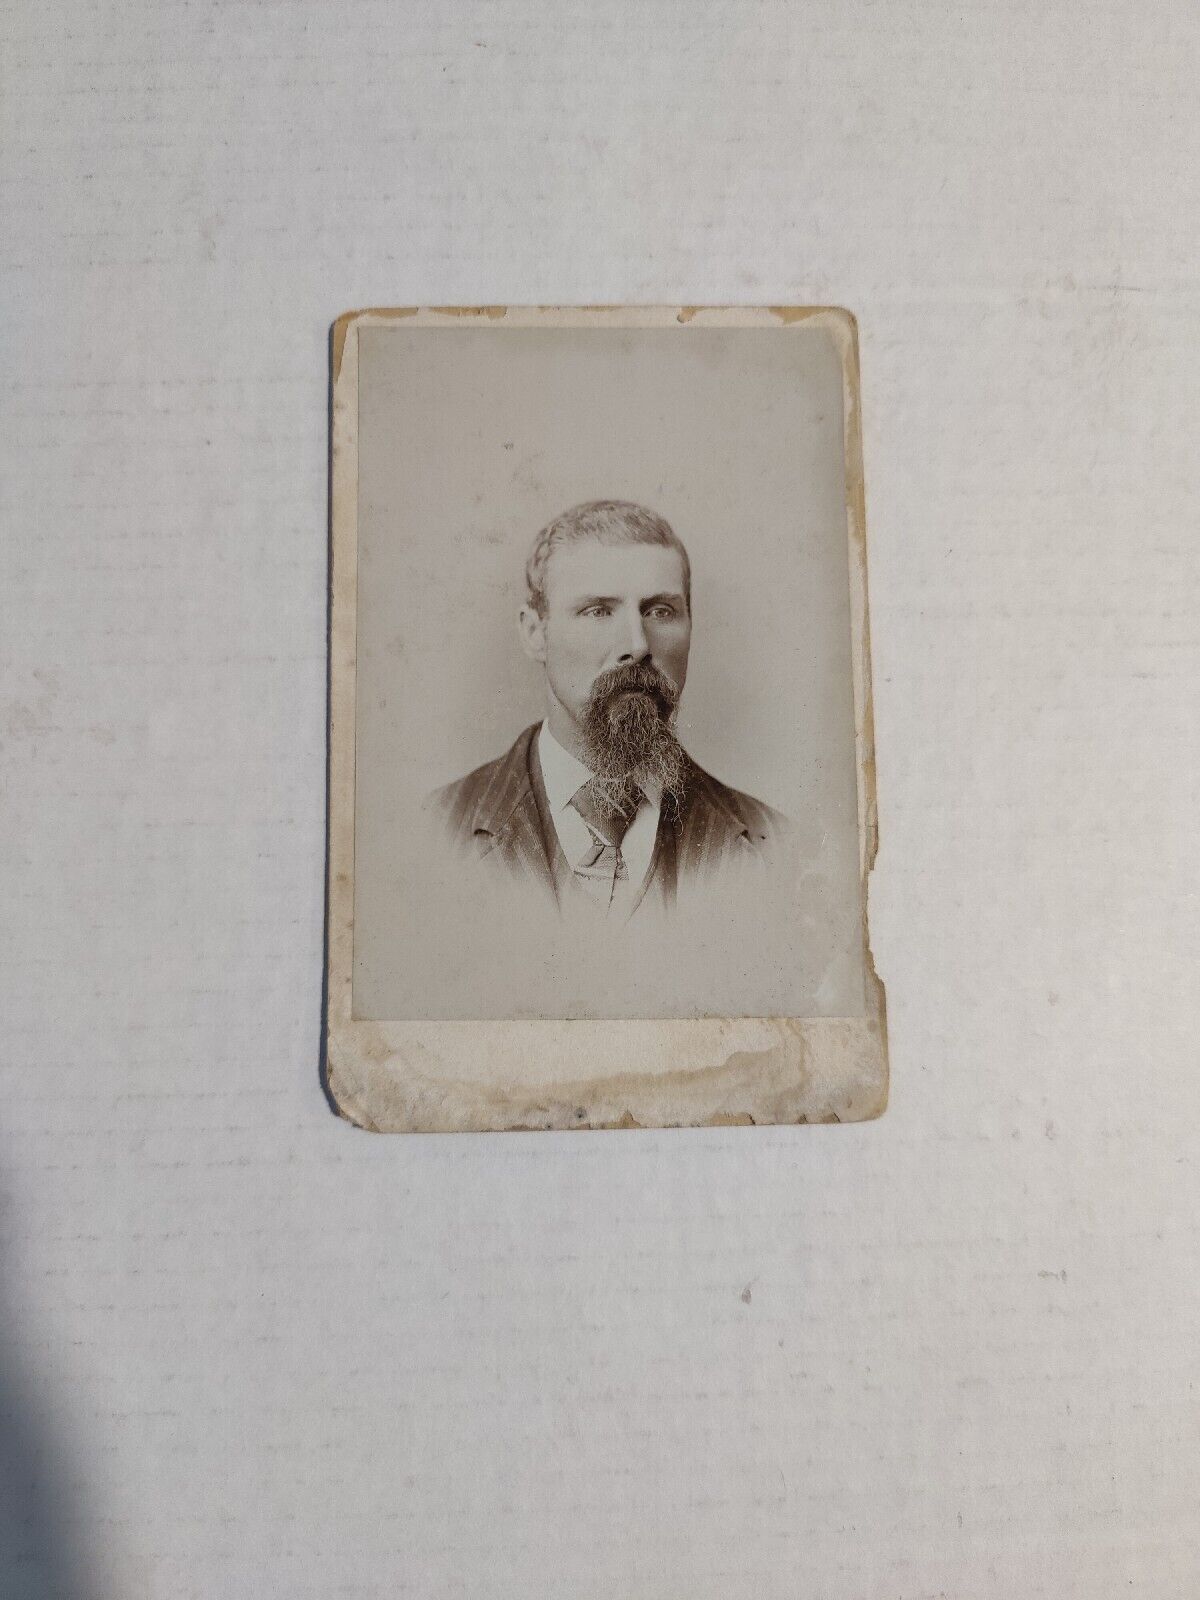 Vintage Cabinet Card Portrait of Man with Beard in a Suit